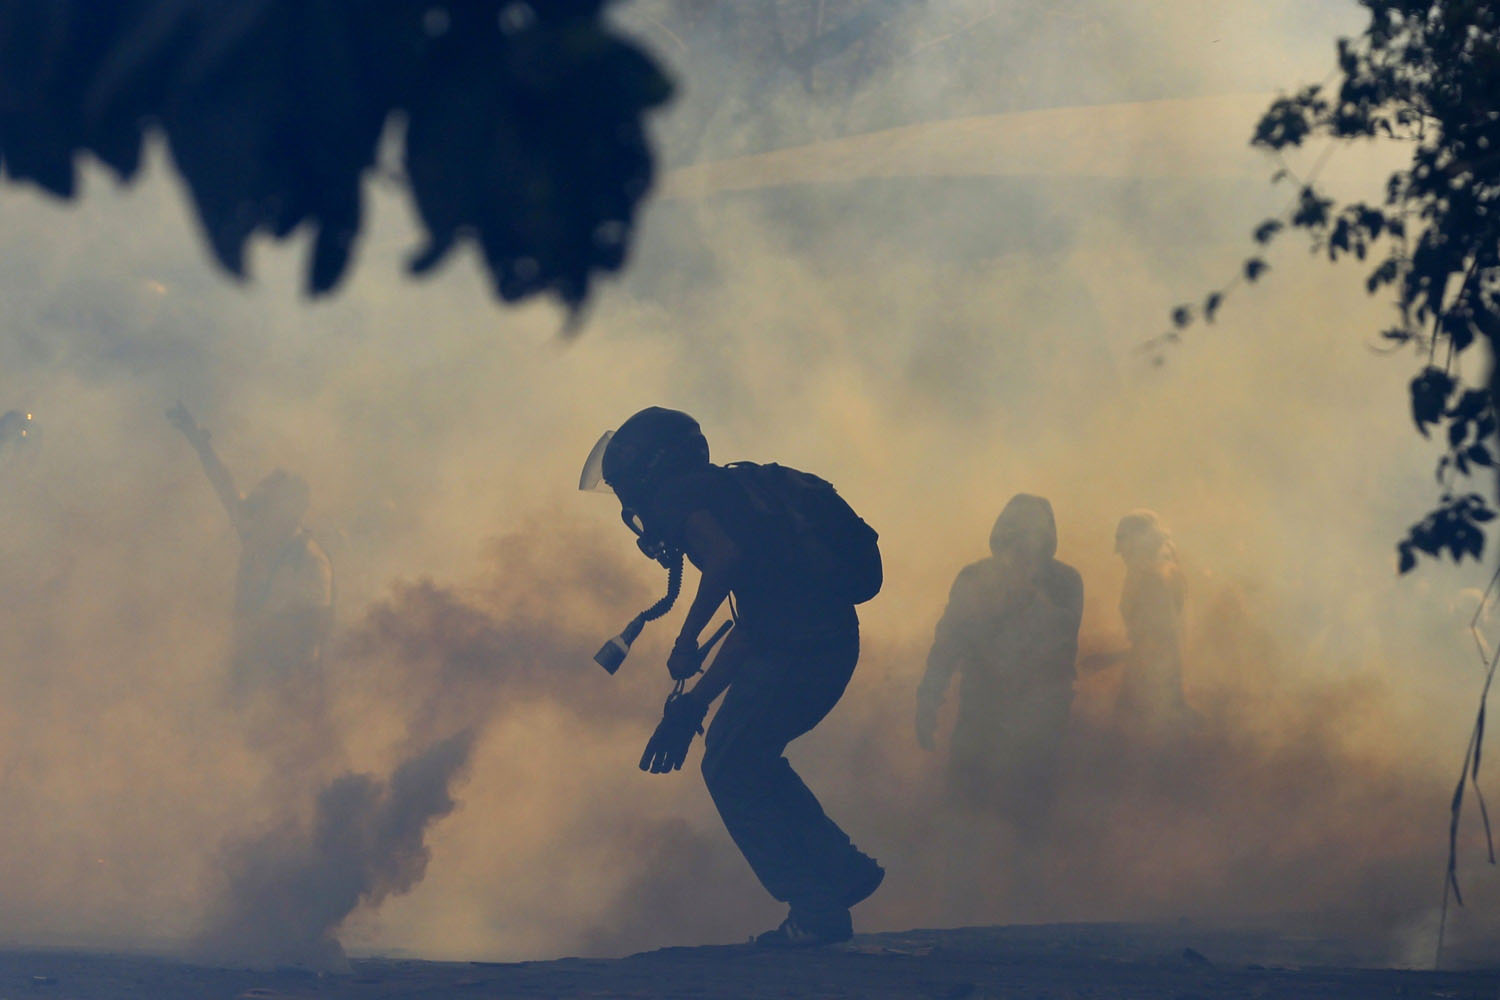 An anti-government protester runs amidst tear gas launched by the police during a protest in Caracas